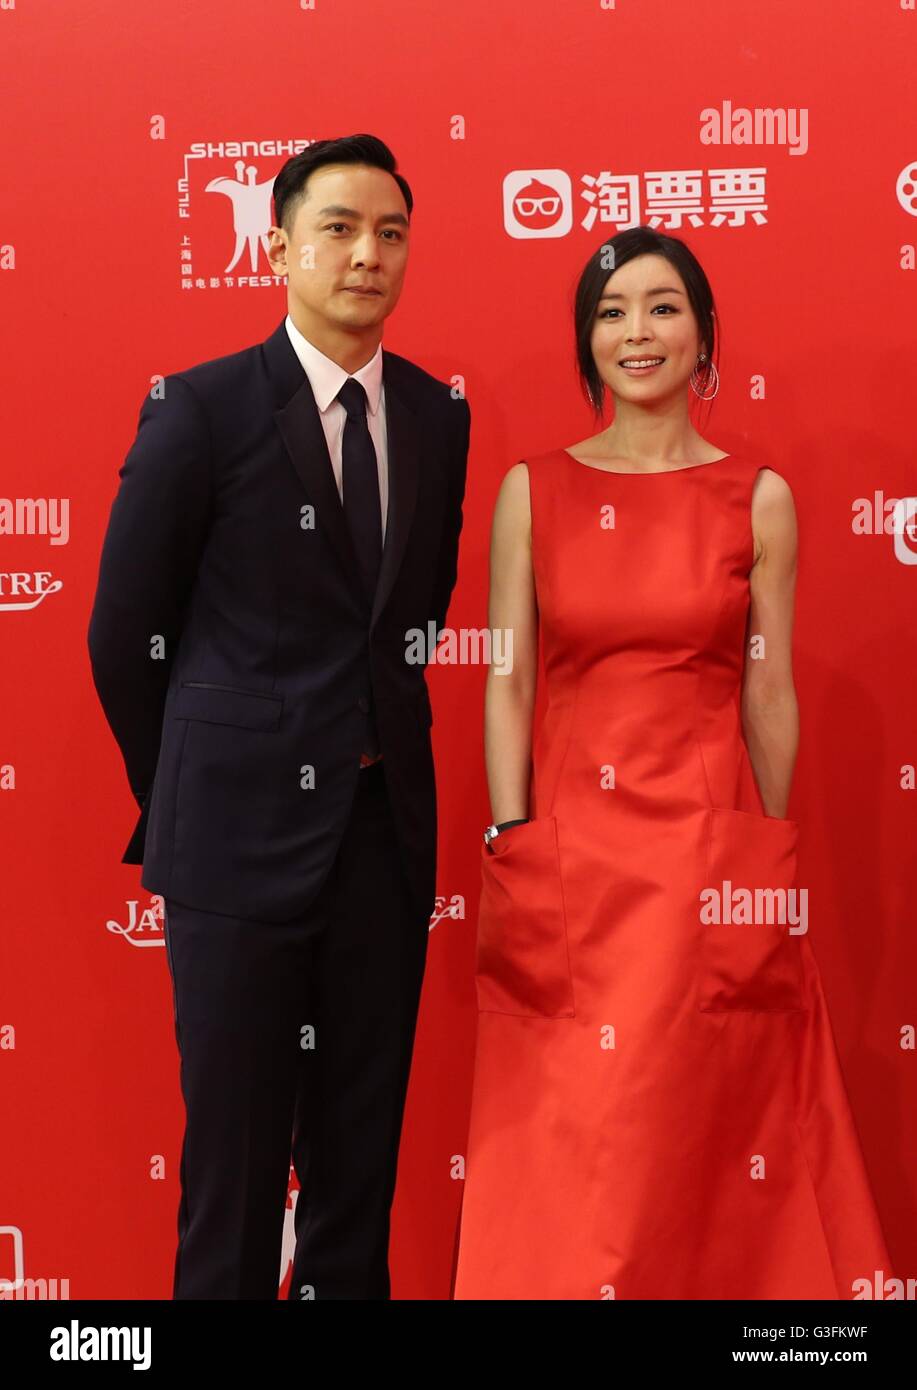 Shanghai, China. 11th June, 2016. Chinese actor Daniel Wu and actress Zhang Jingchu pose on the red carpet as they arrive for the opening ceremony of 2016 Shanghai International Film Festival in Shanghai, east China, June 11, 2016. © Pei Xin/Xinhua/Alamy Live News Stock Photo